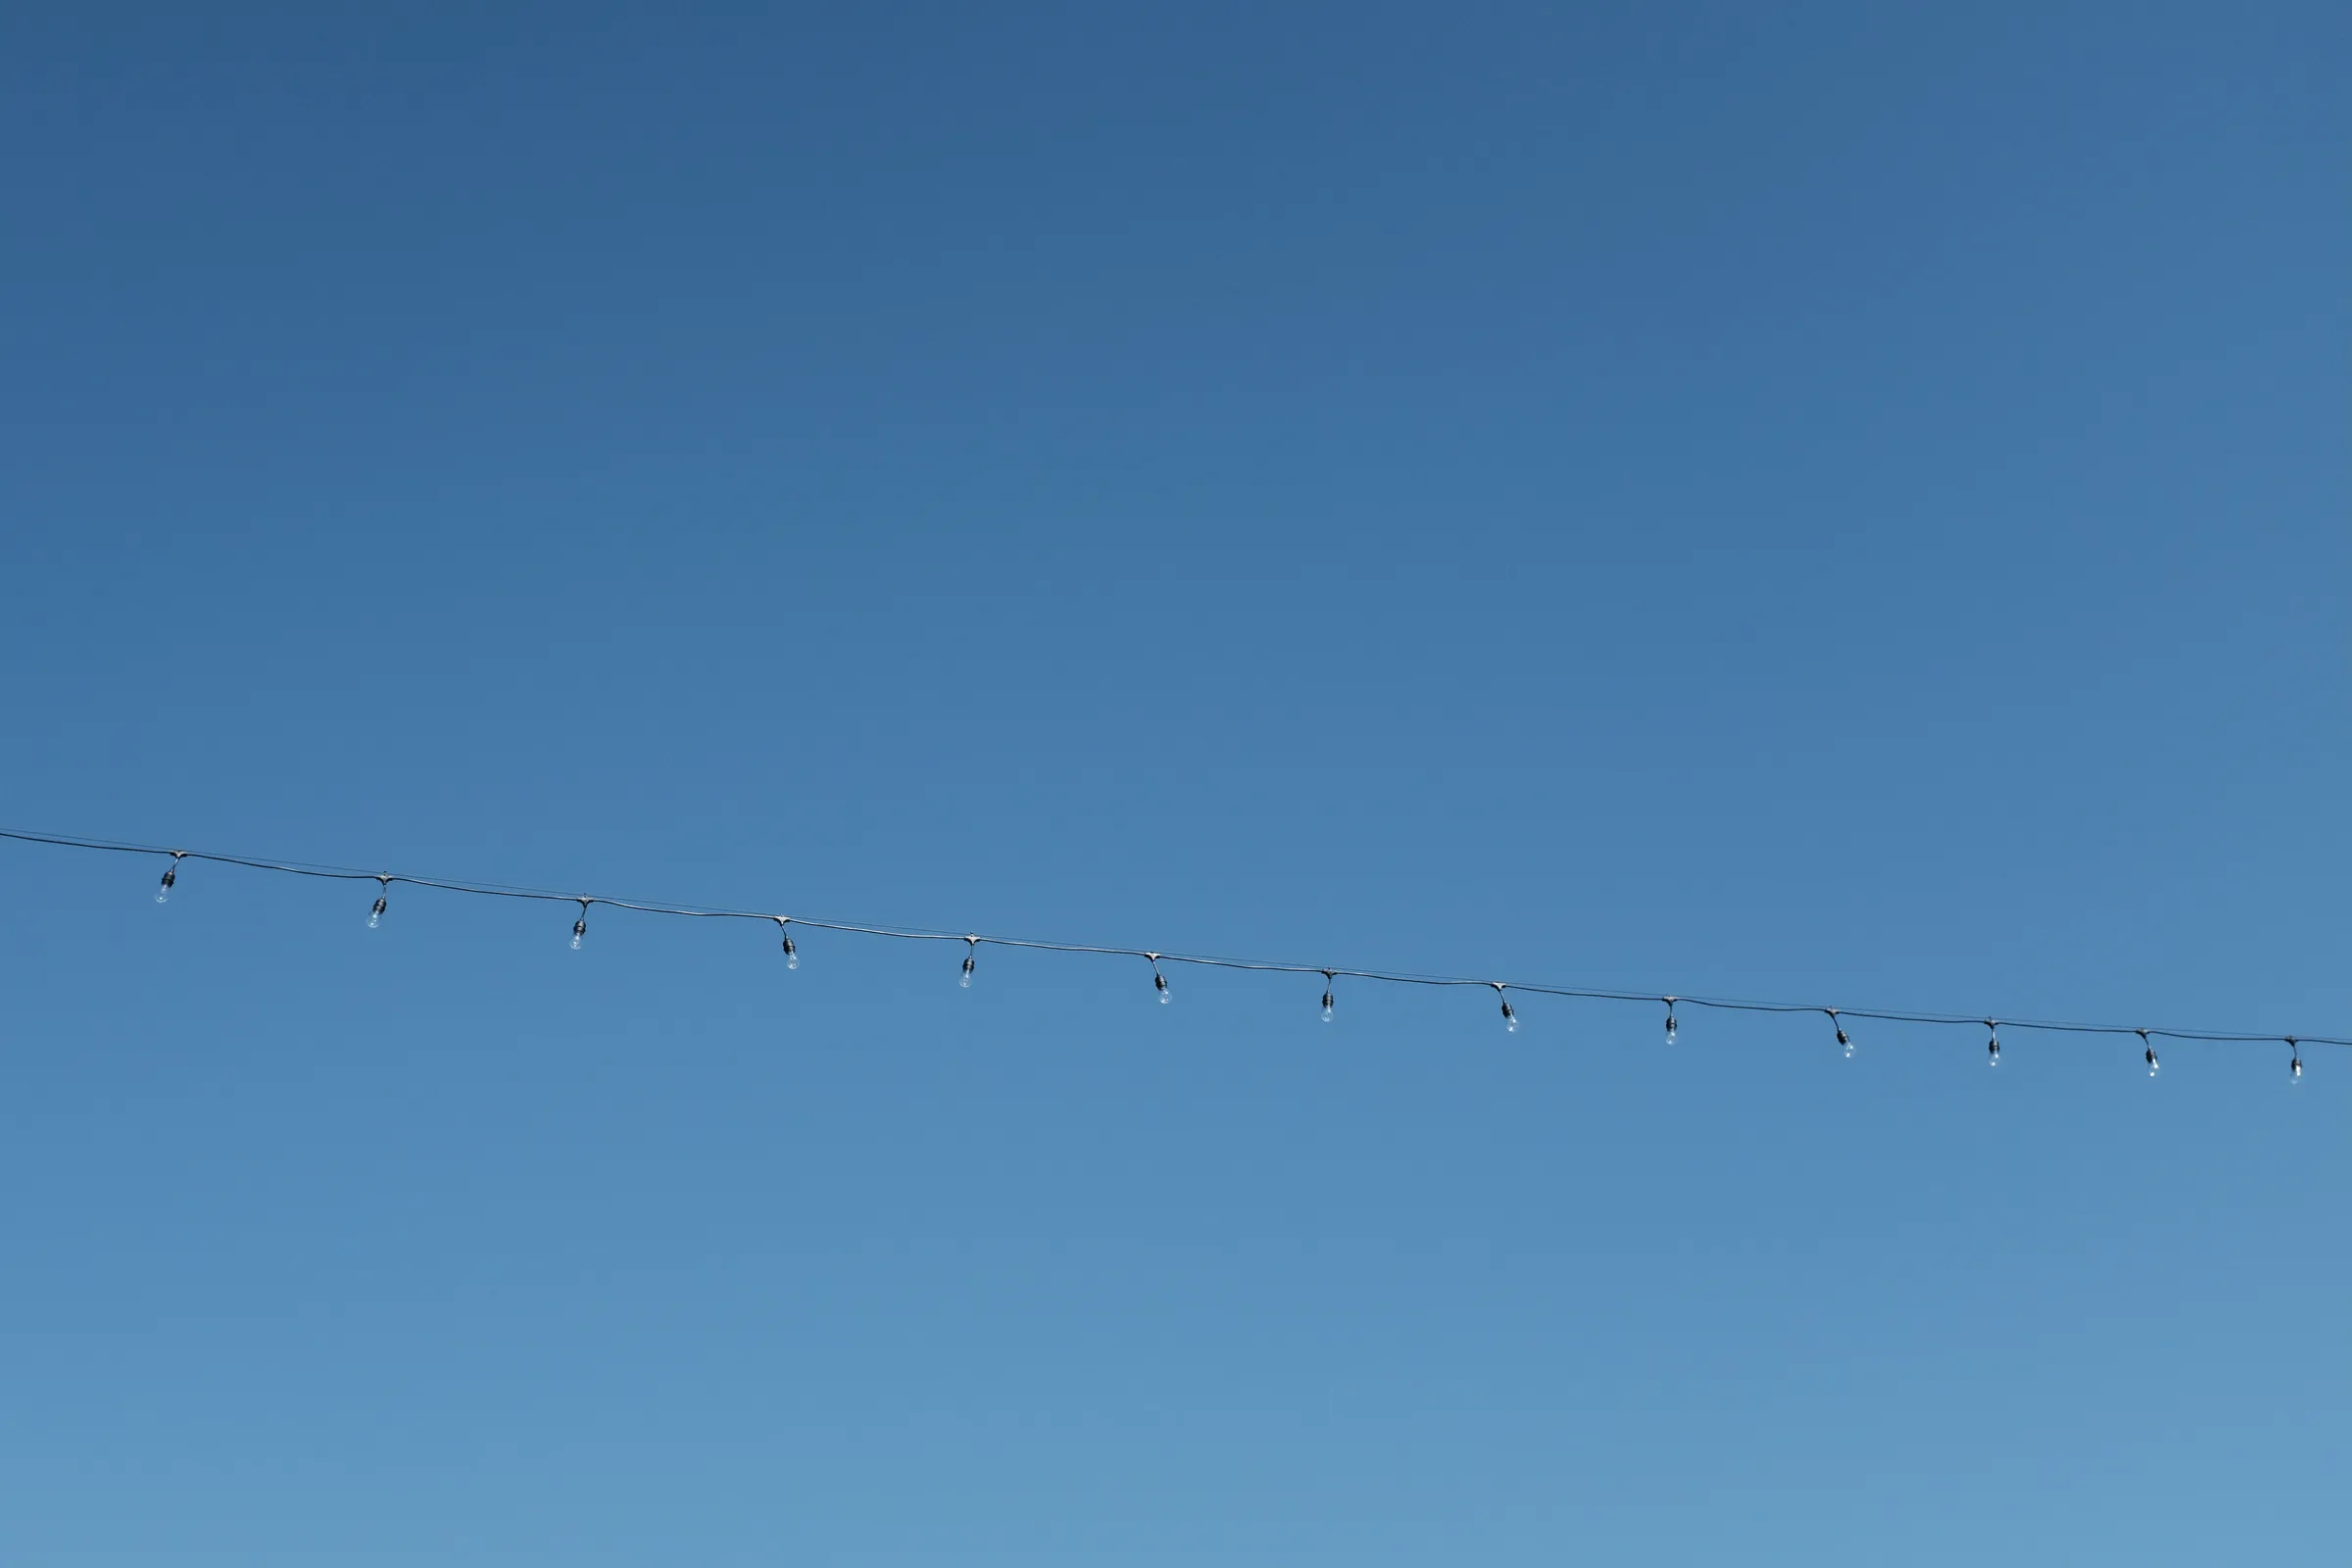 Small lights, suspended by a black cord, hang in front of a blue, spring sky.